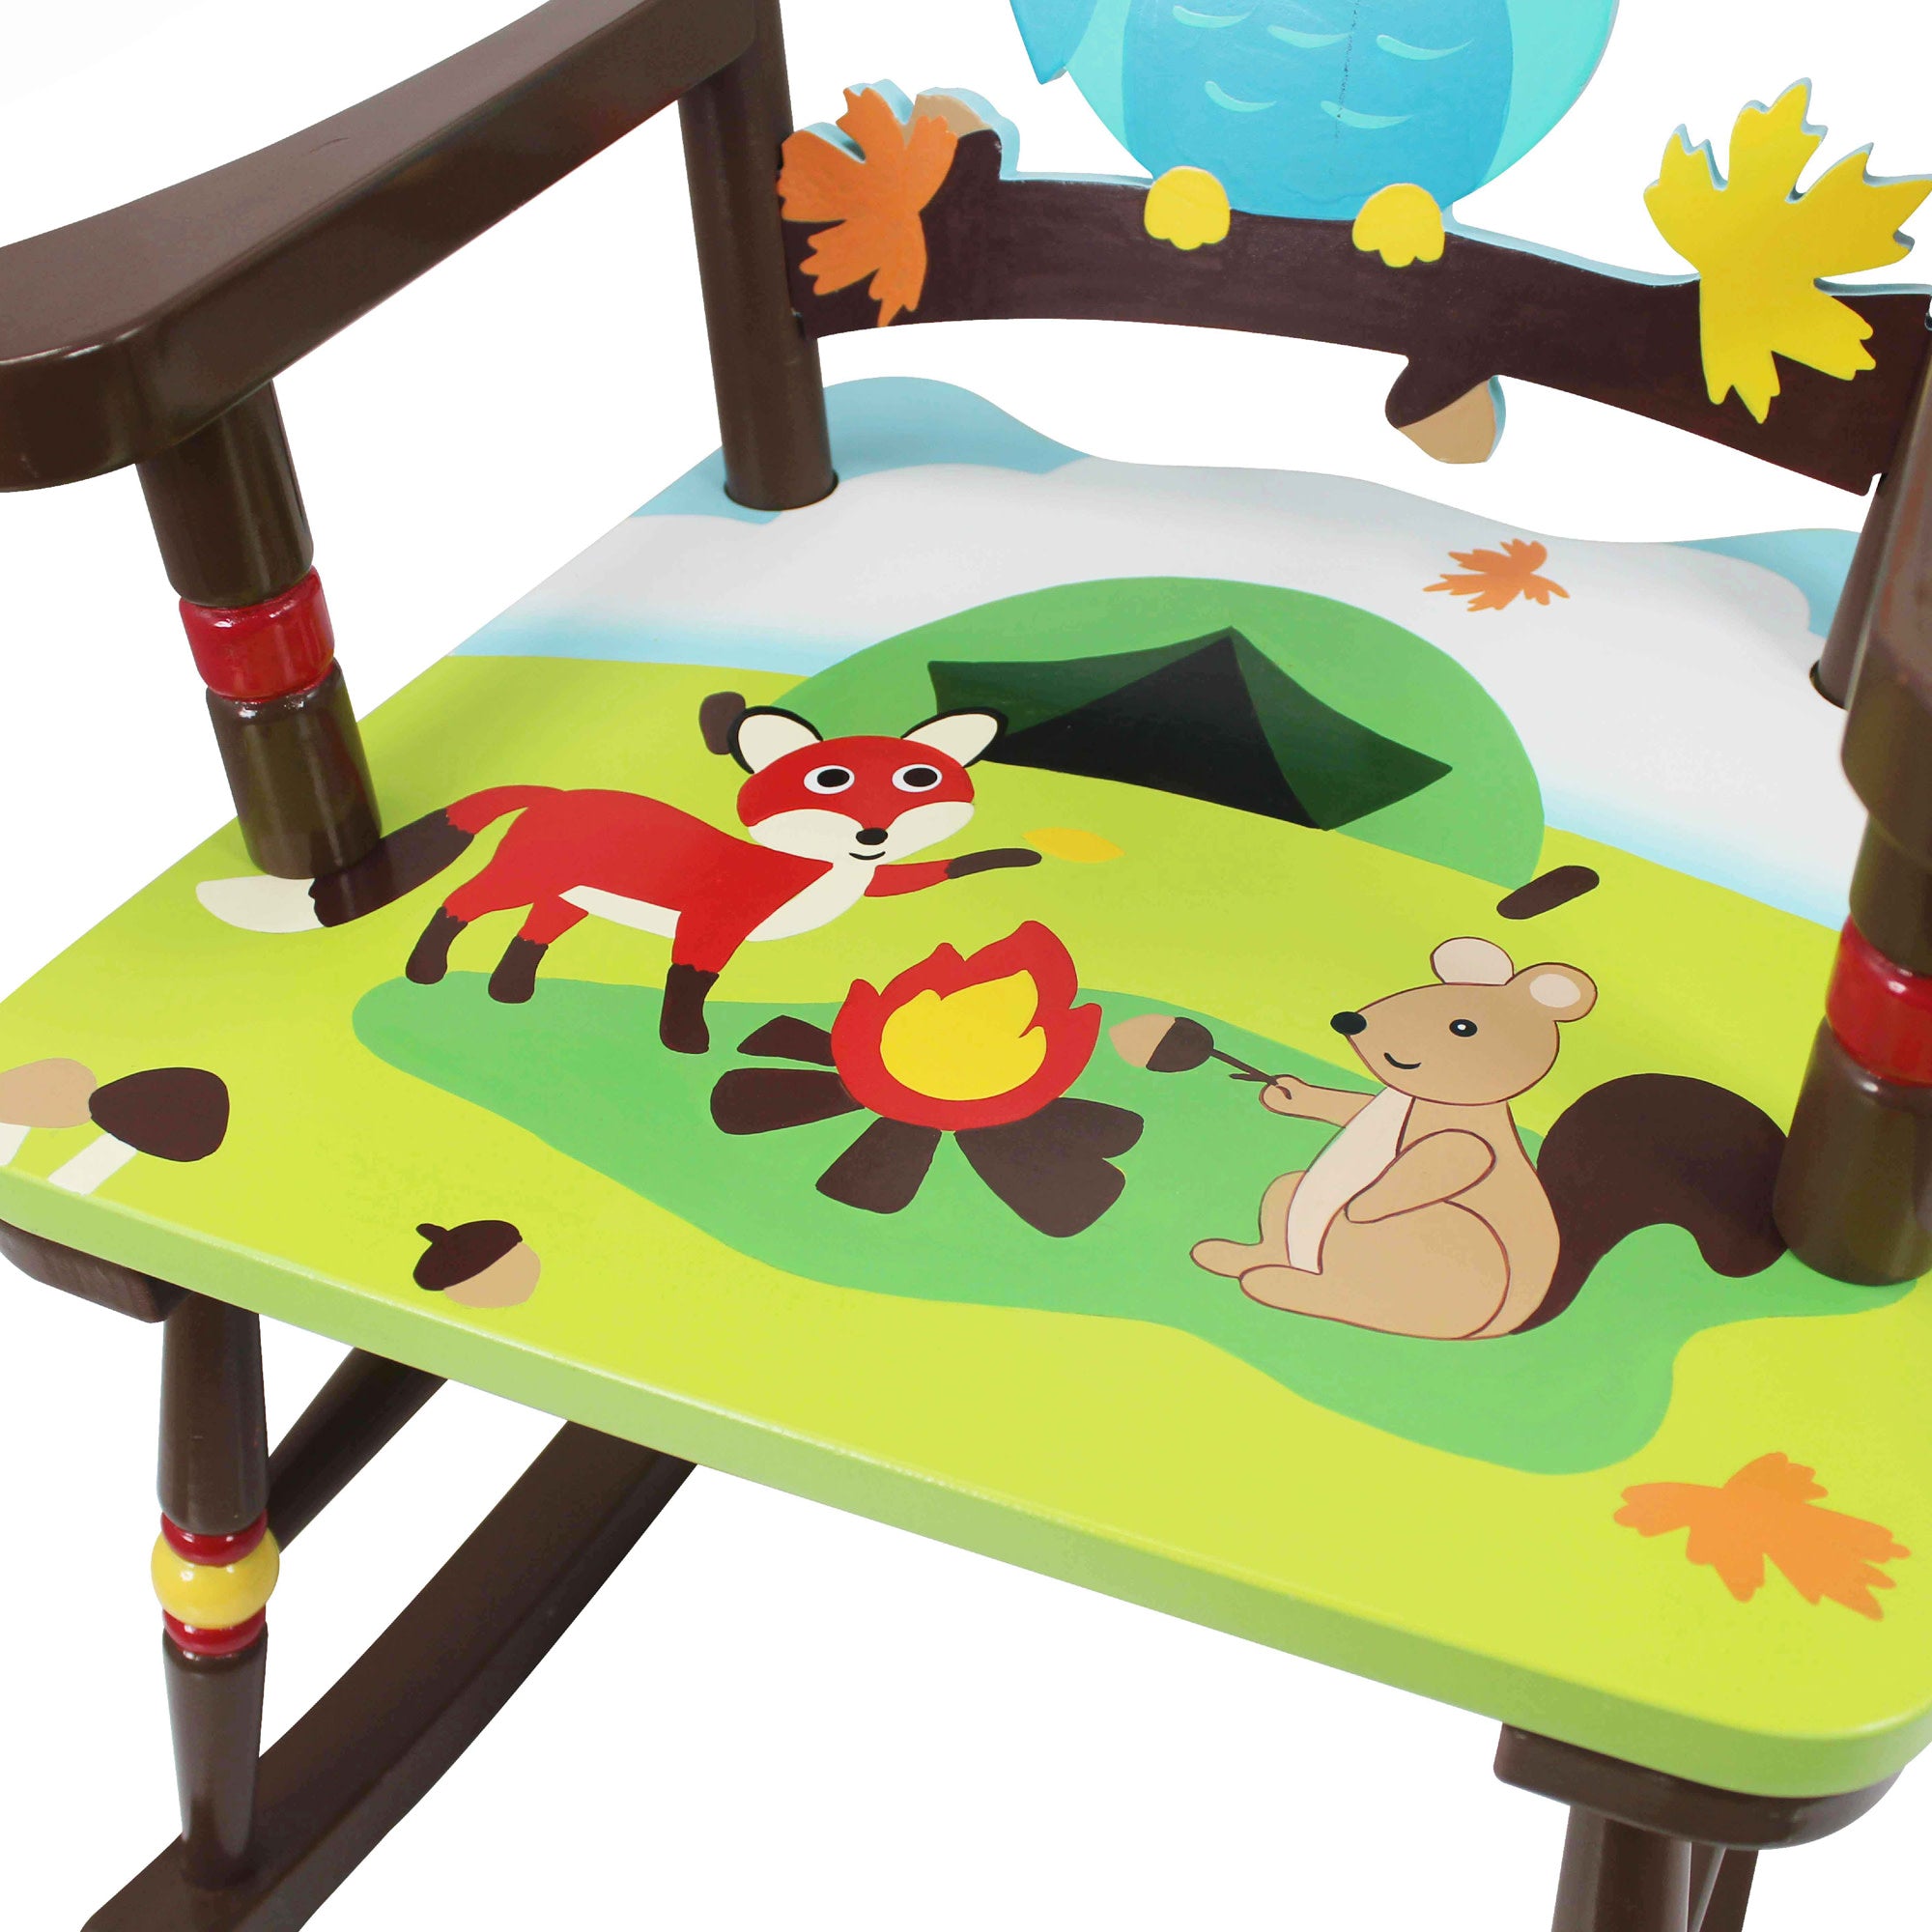 FANTASY FIELDS - ENCHANTED WOODLAND ROCKING CHAIR, MULTICOLOR